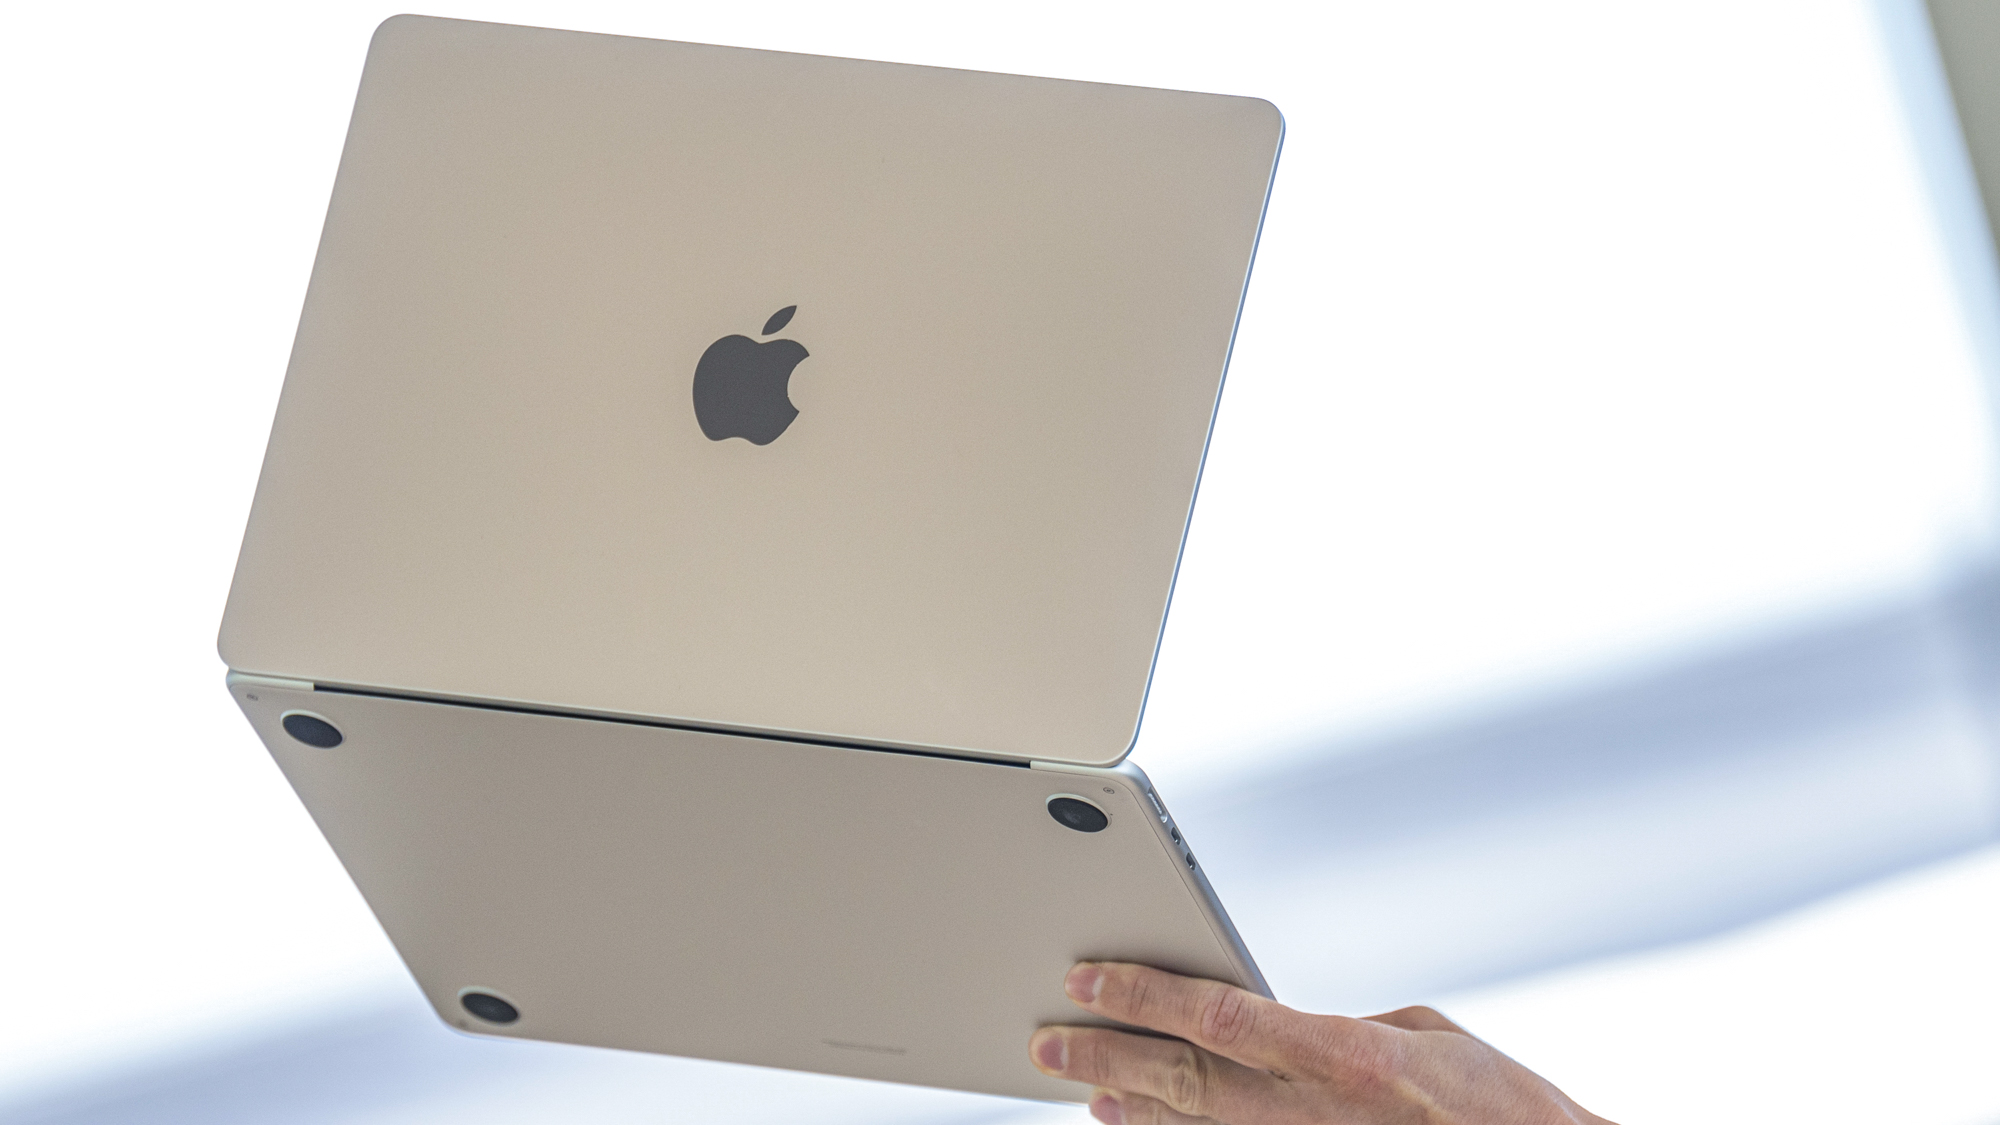 MacBook Air 2022 unveiled at Apple Worldwide Developers Conference 2022